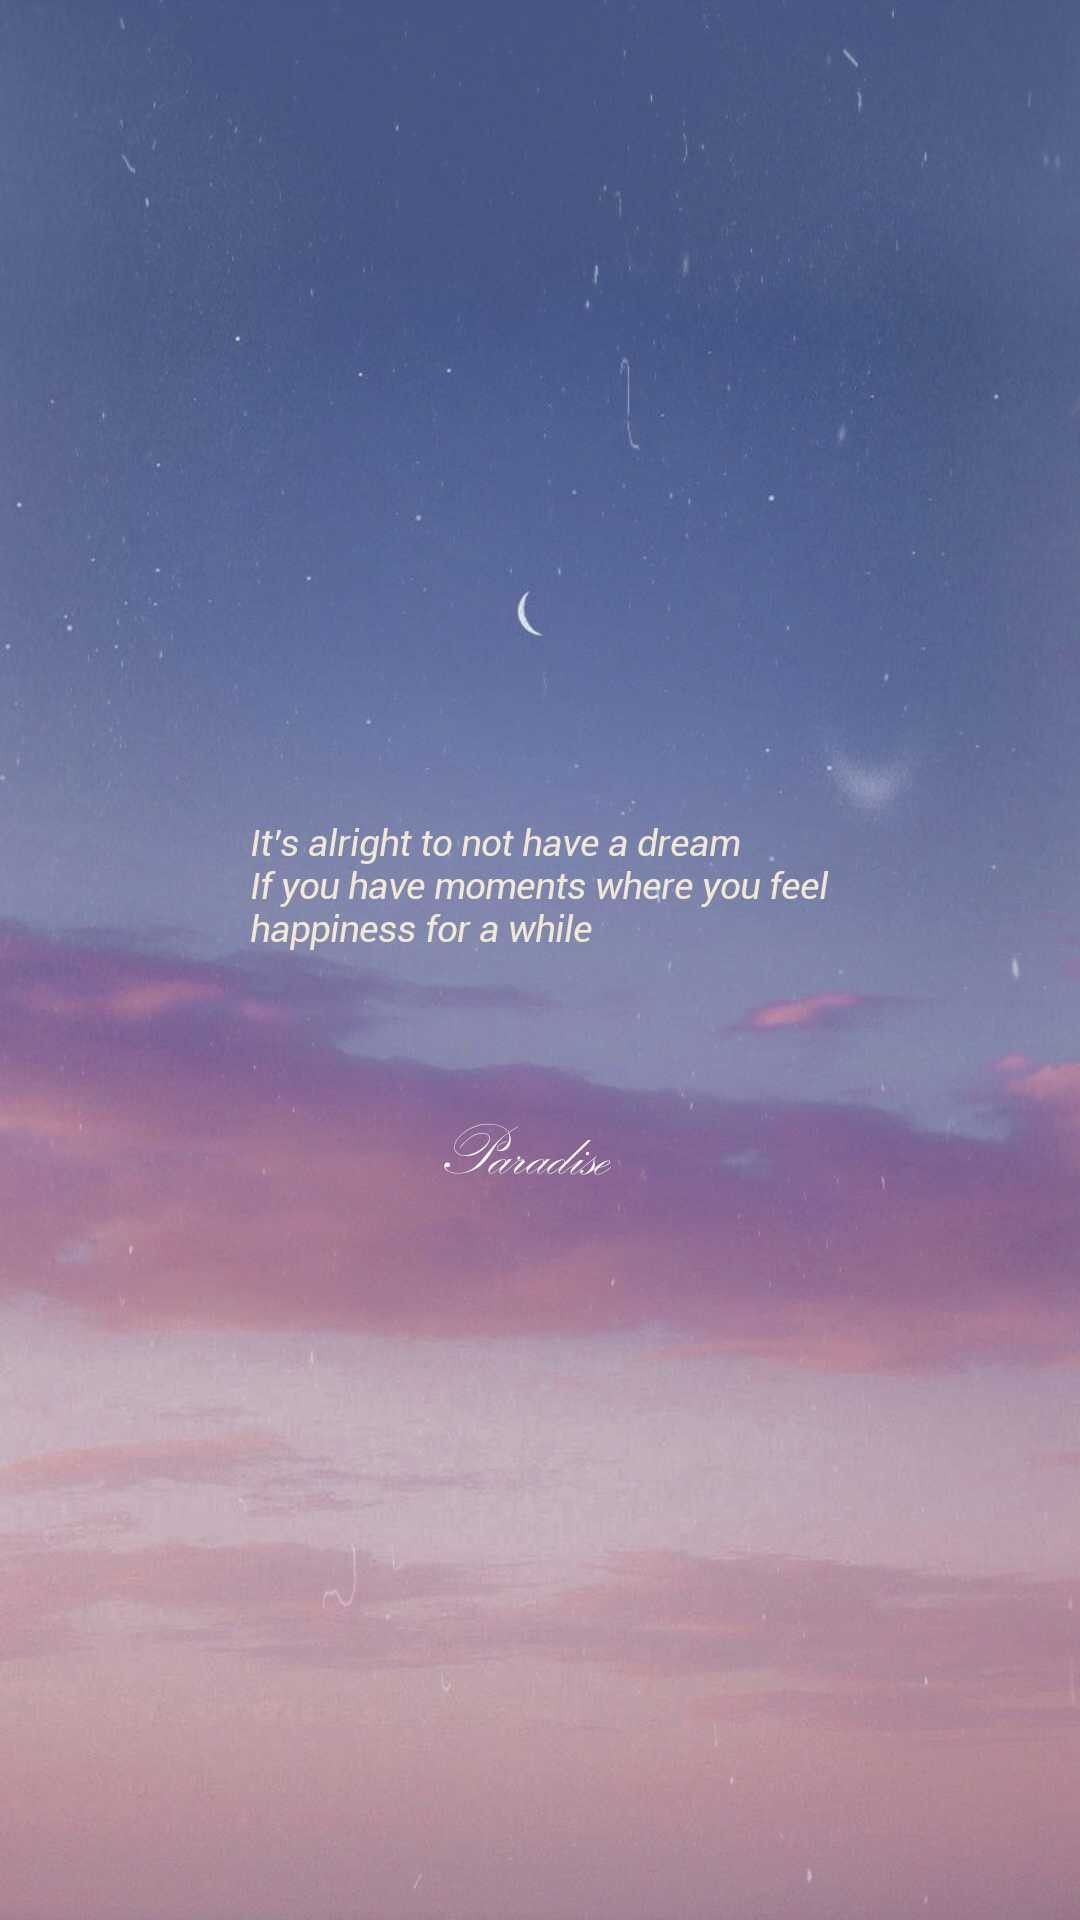 Aesthetic Sky Quotes, Download Wallpaper